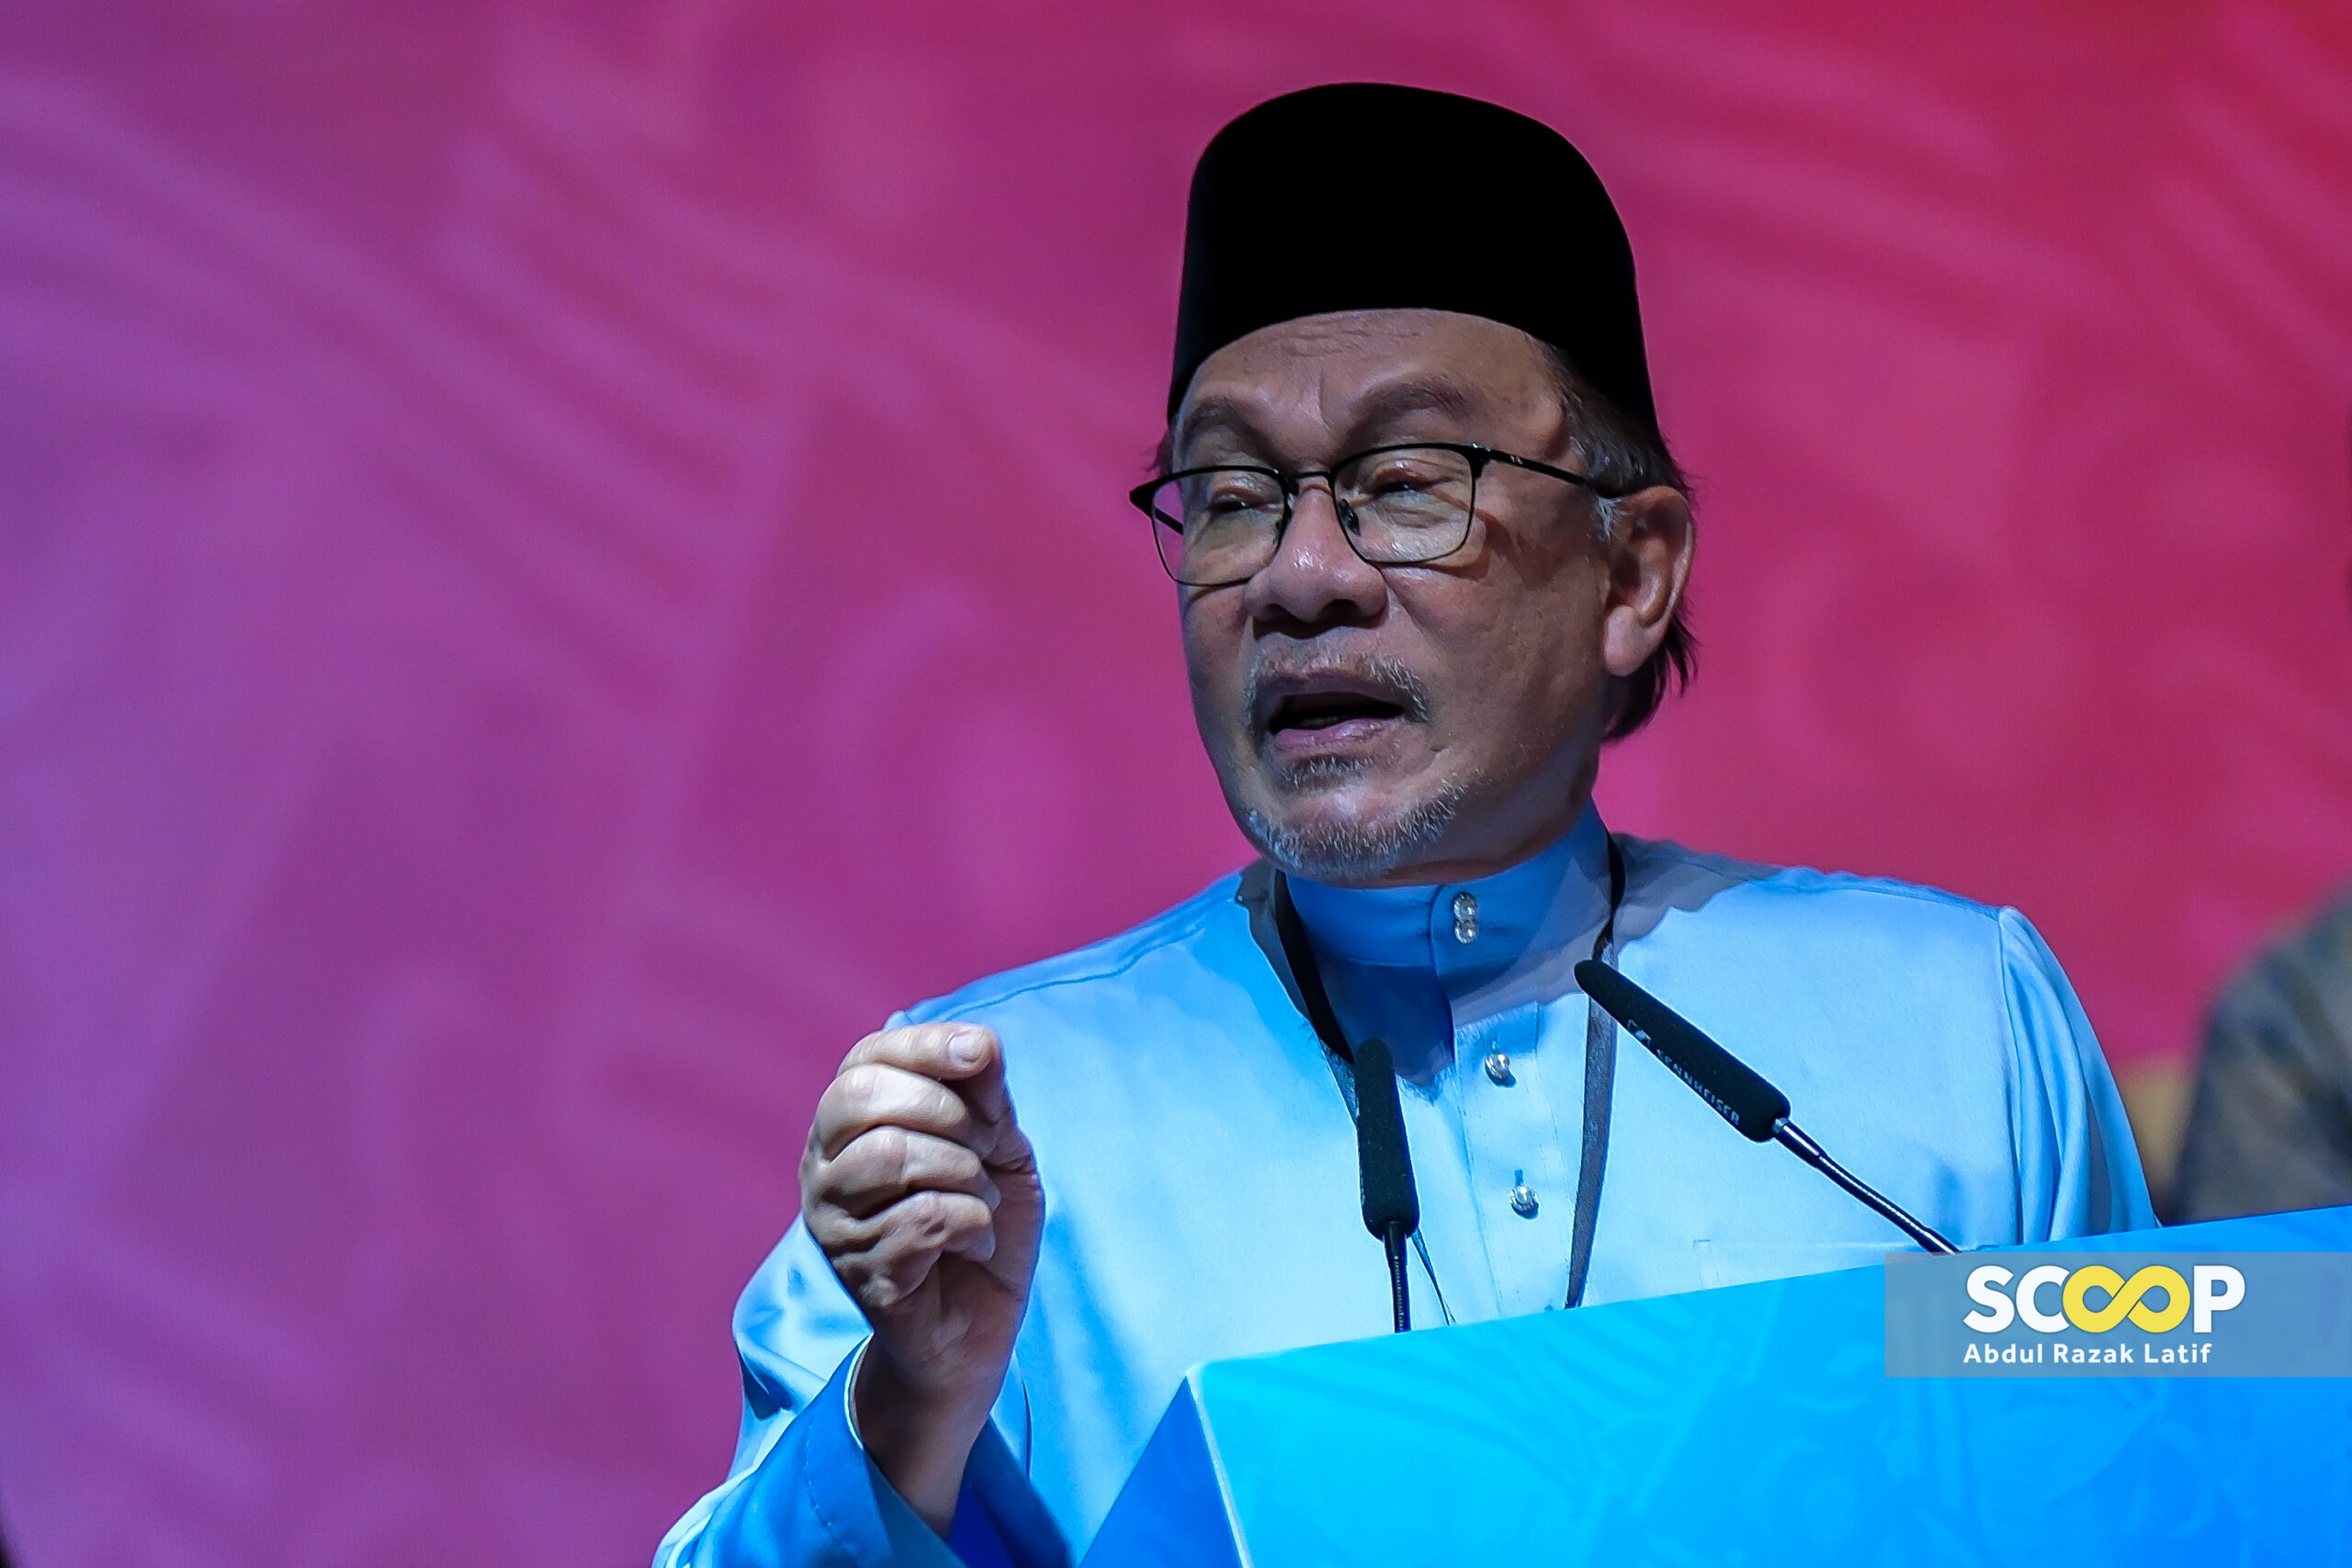 Direct concerns about Islamic affairs to national council, Anwar tells non-Muslims